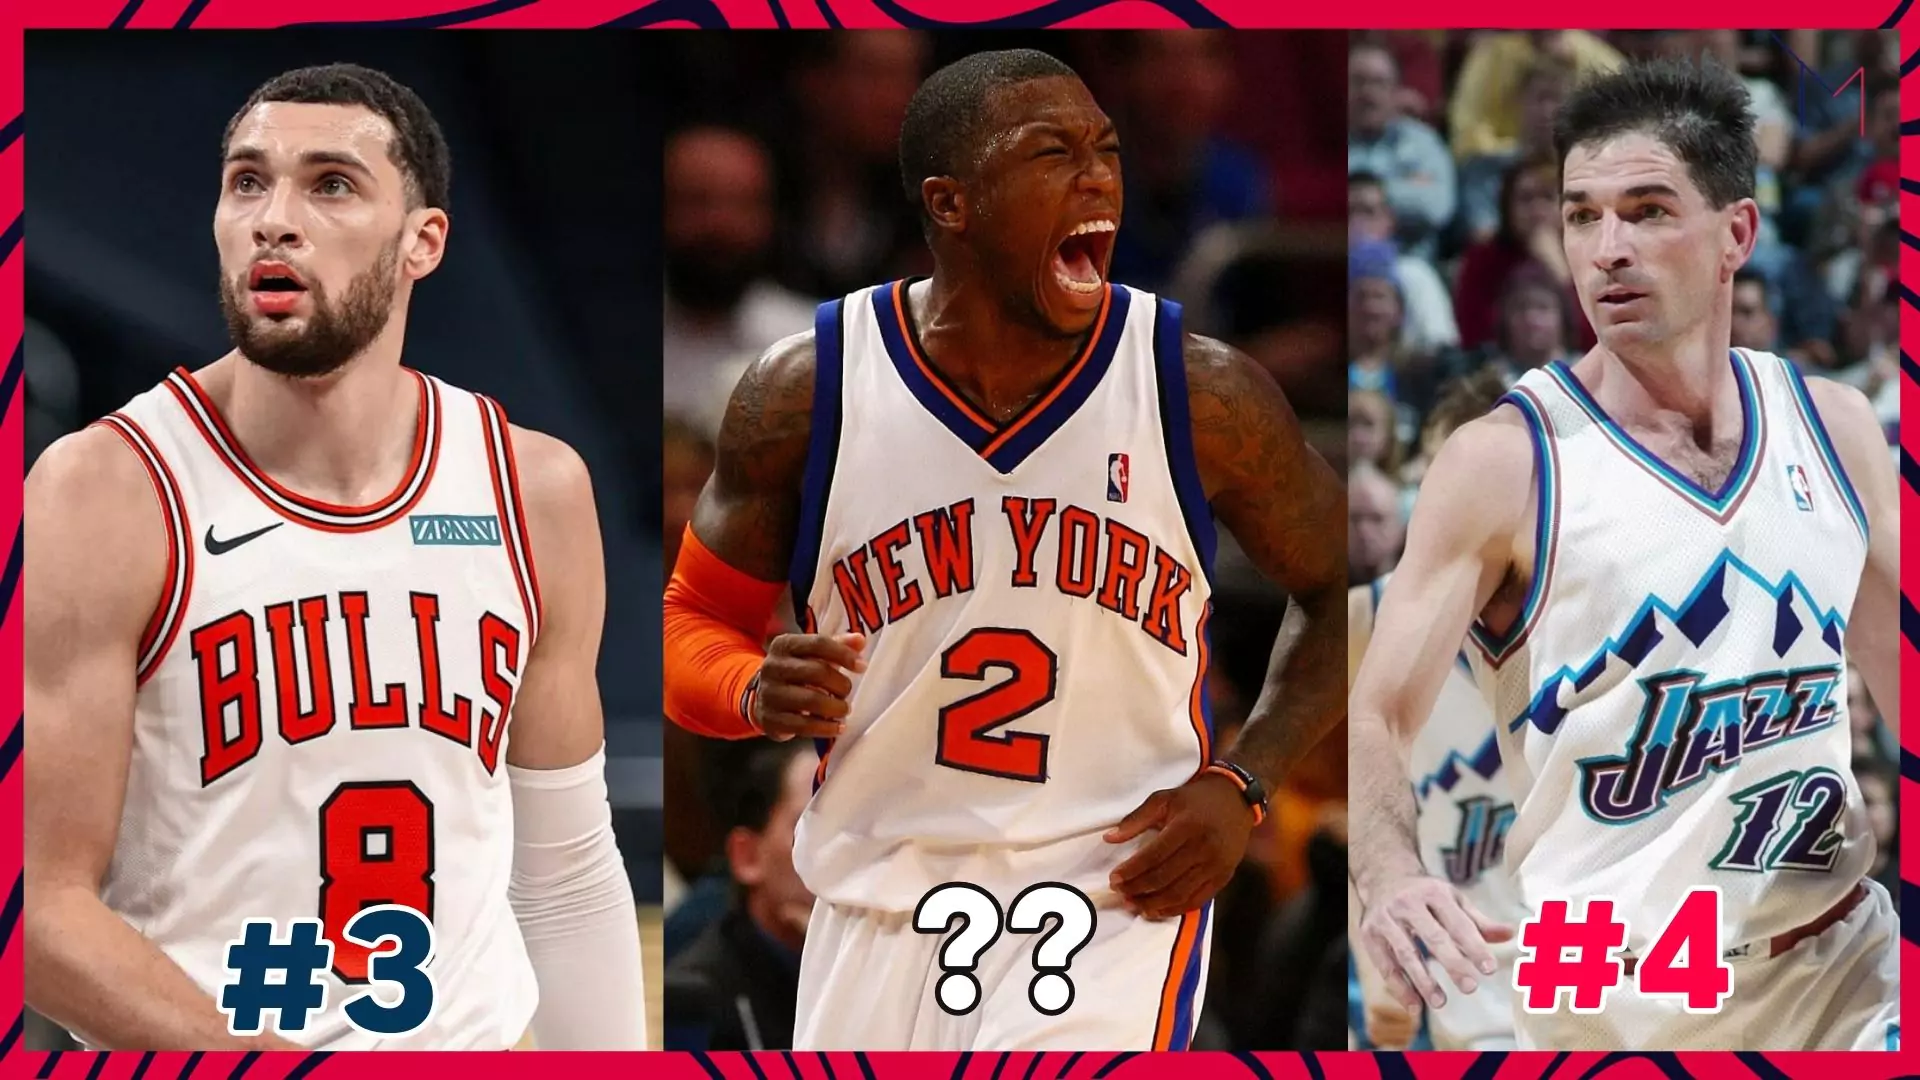 Top 10 most popular basketball players from Washington - Famous NBA players from Washington